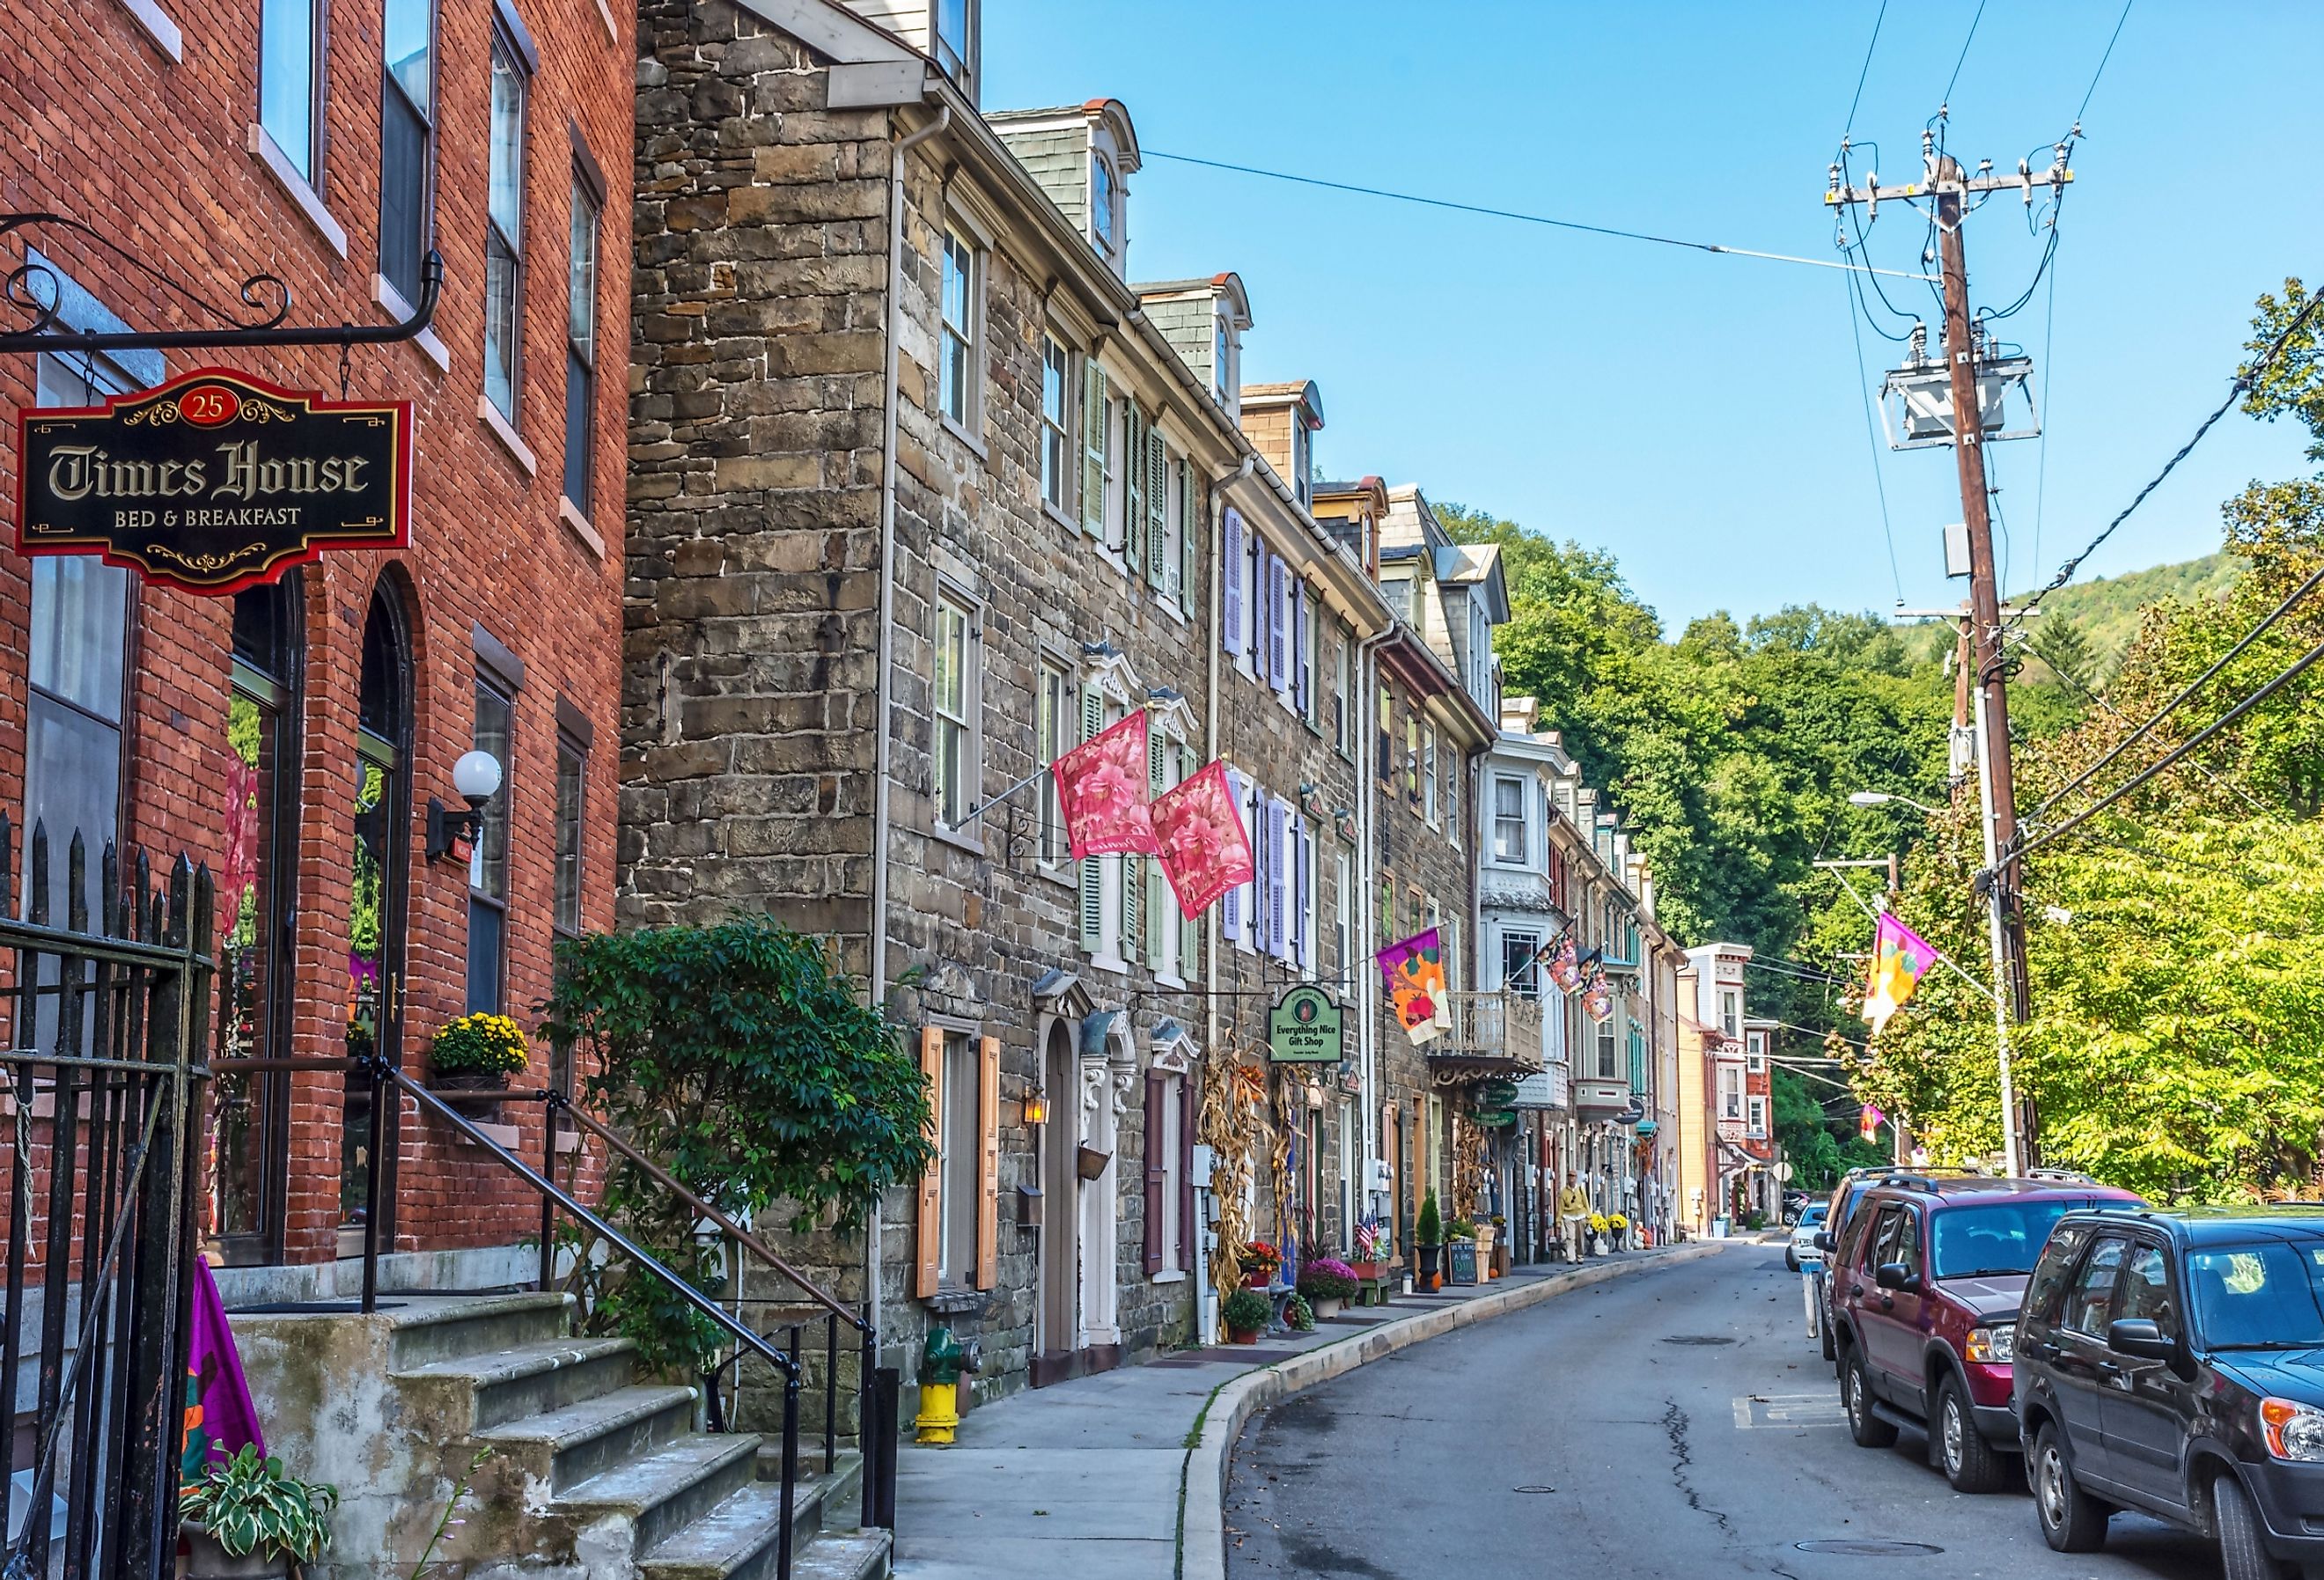 Historic row homes with shops on Race St. in Jim Thorpe, Pennsylvania.